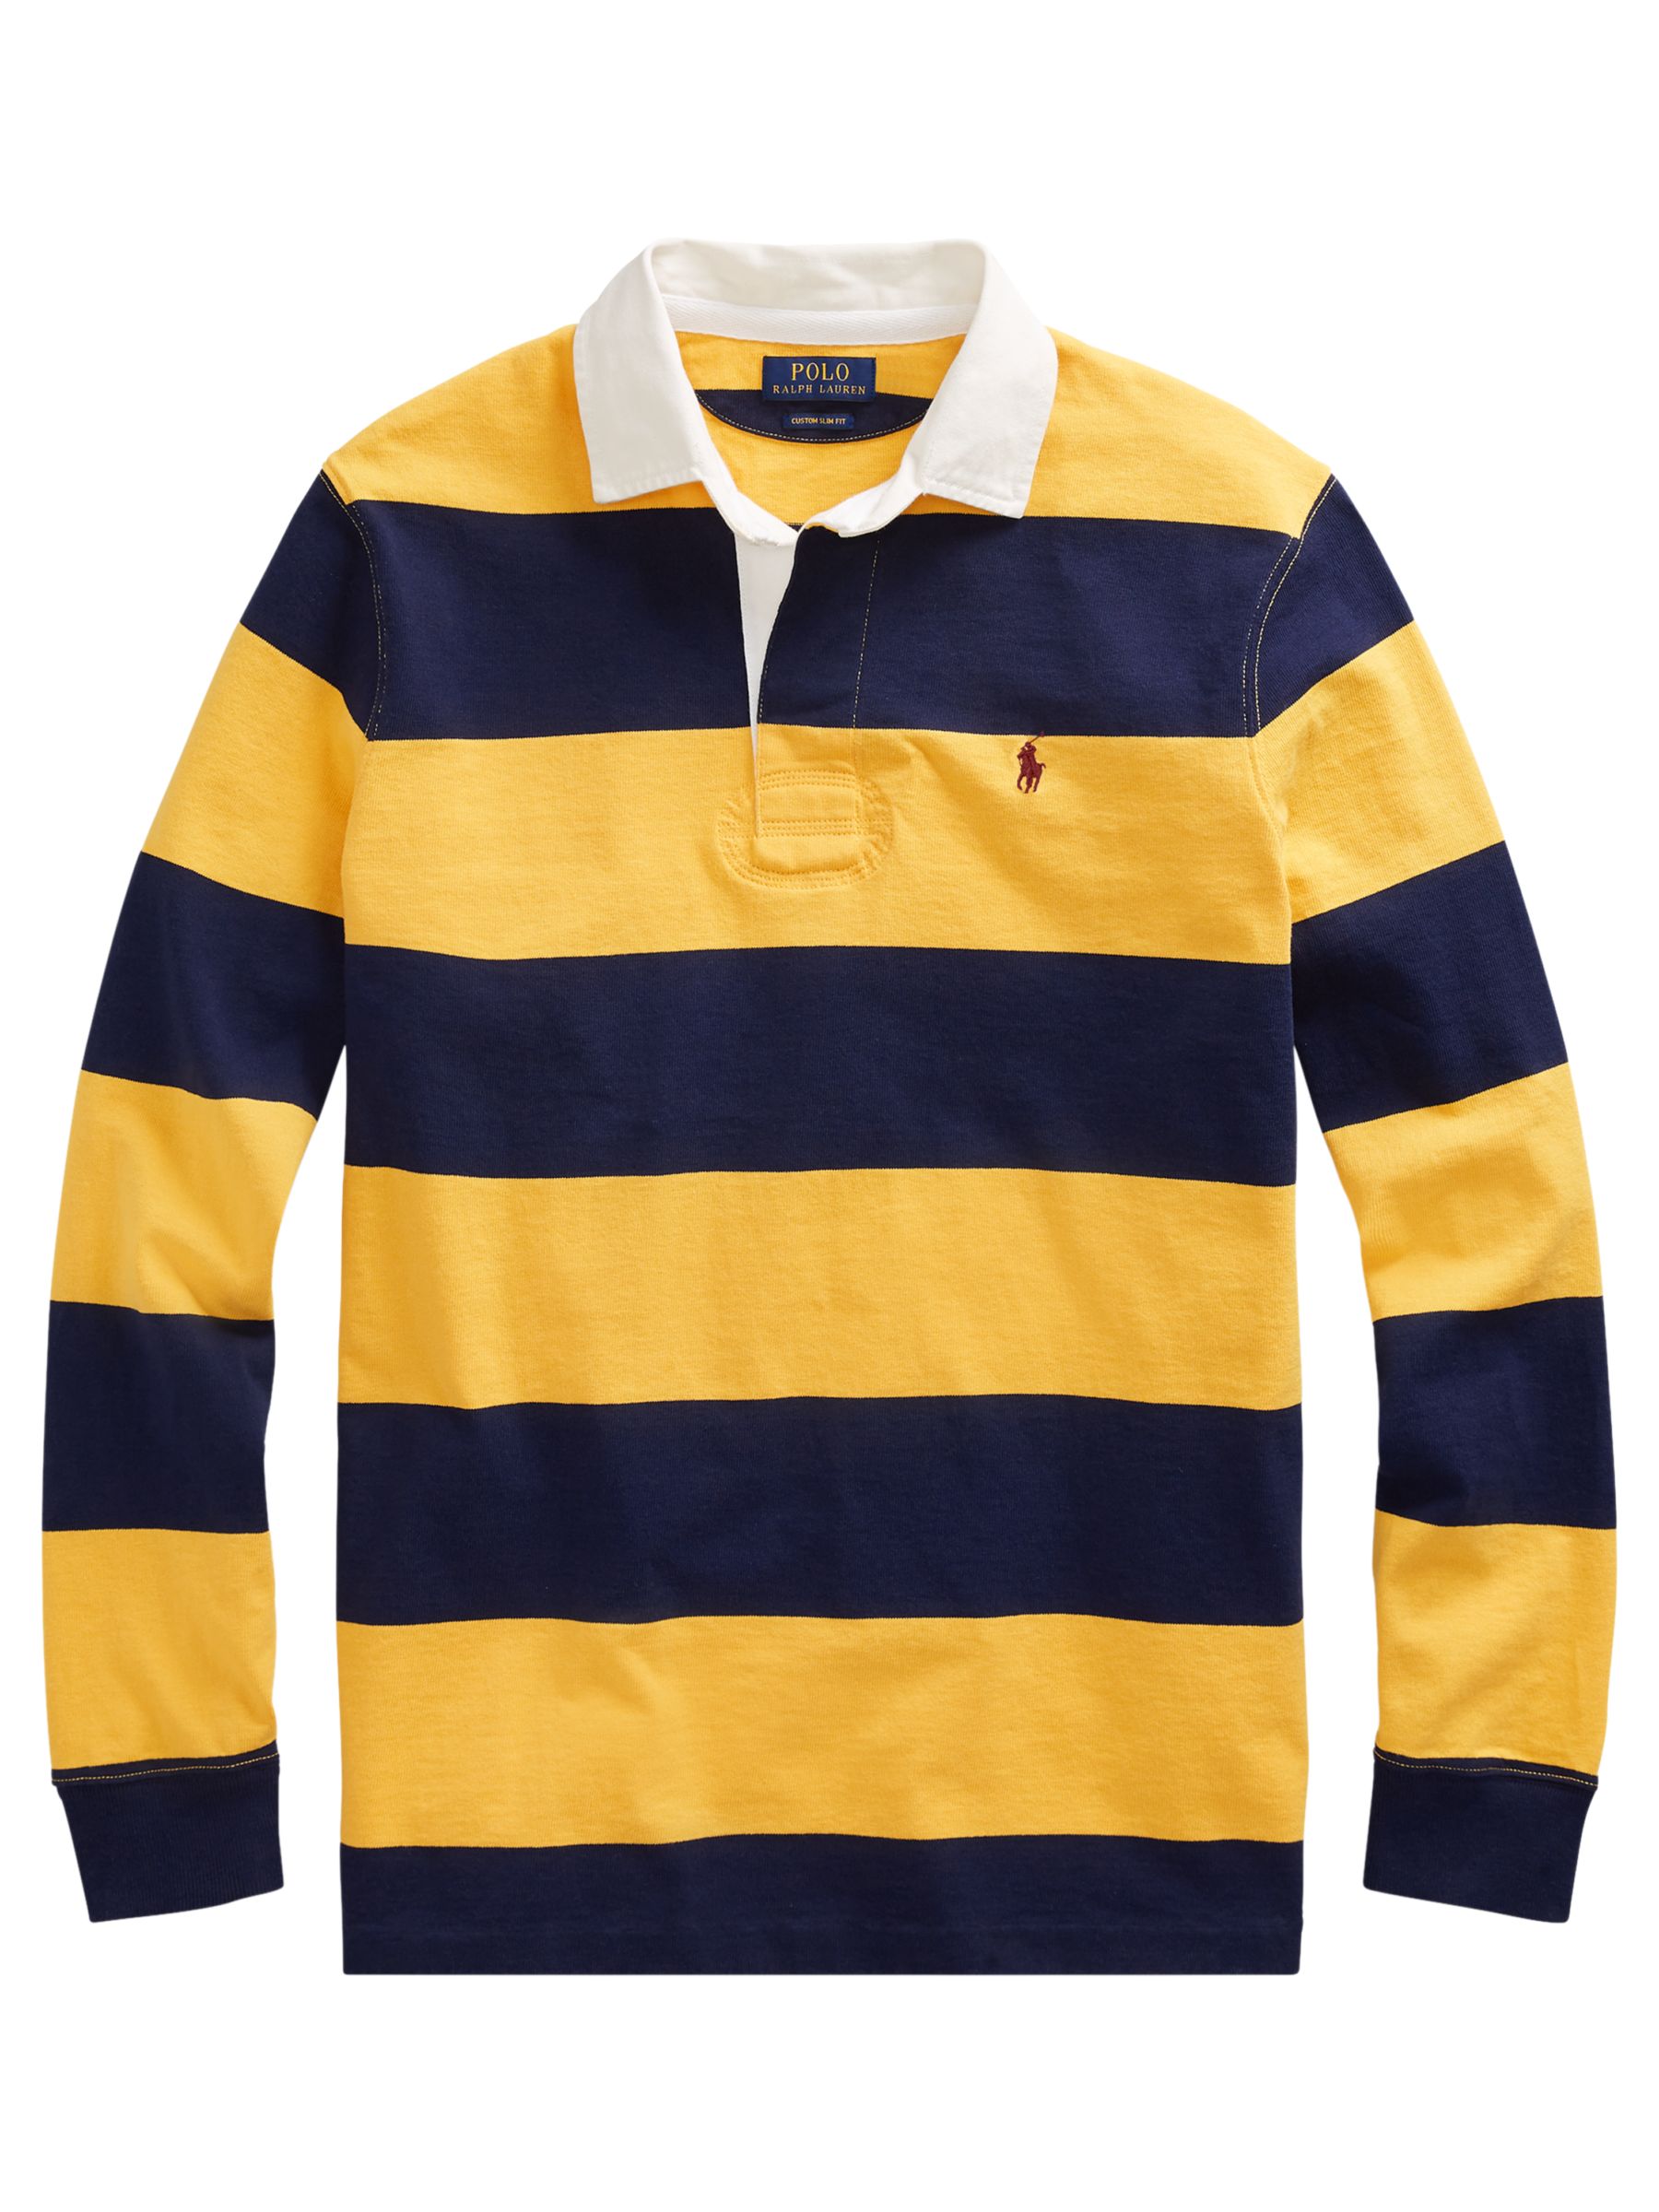 ralph lauren polo rugby jersey